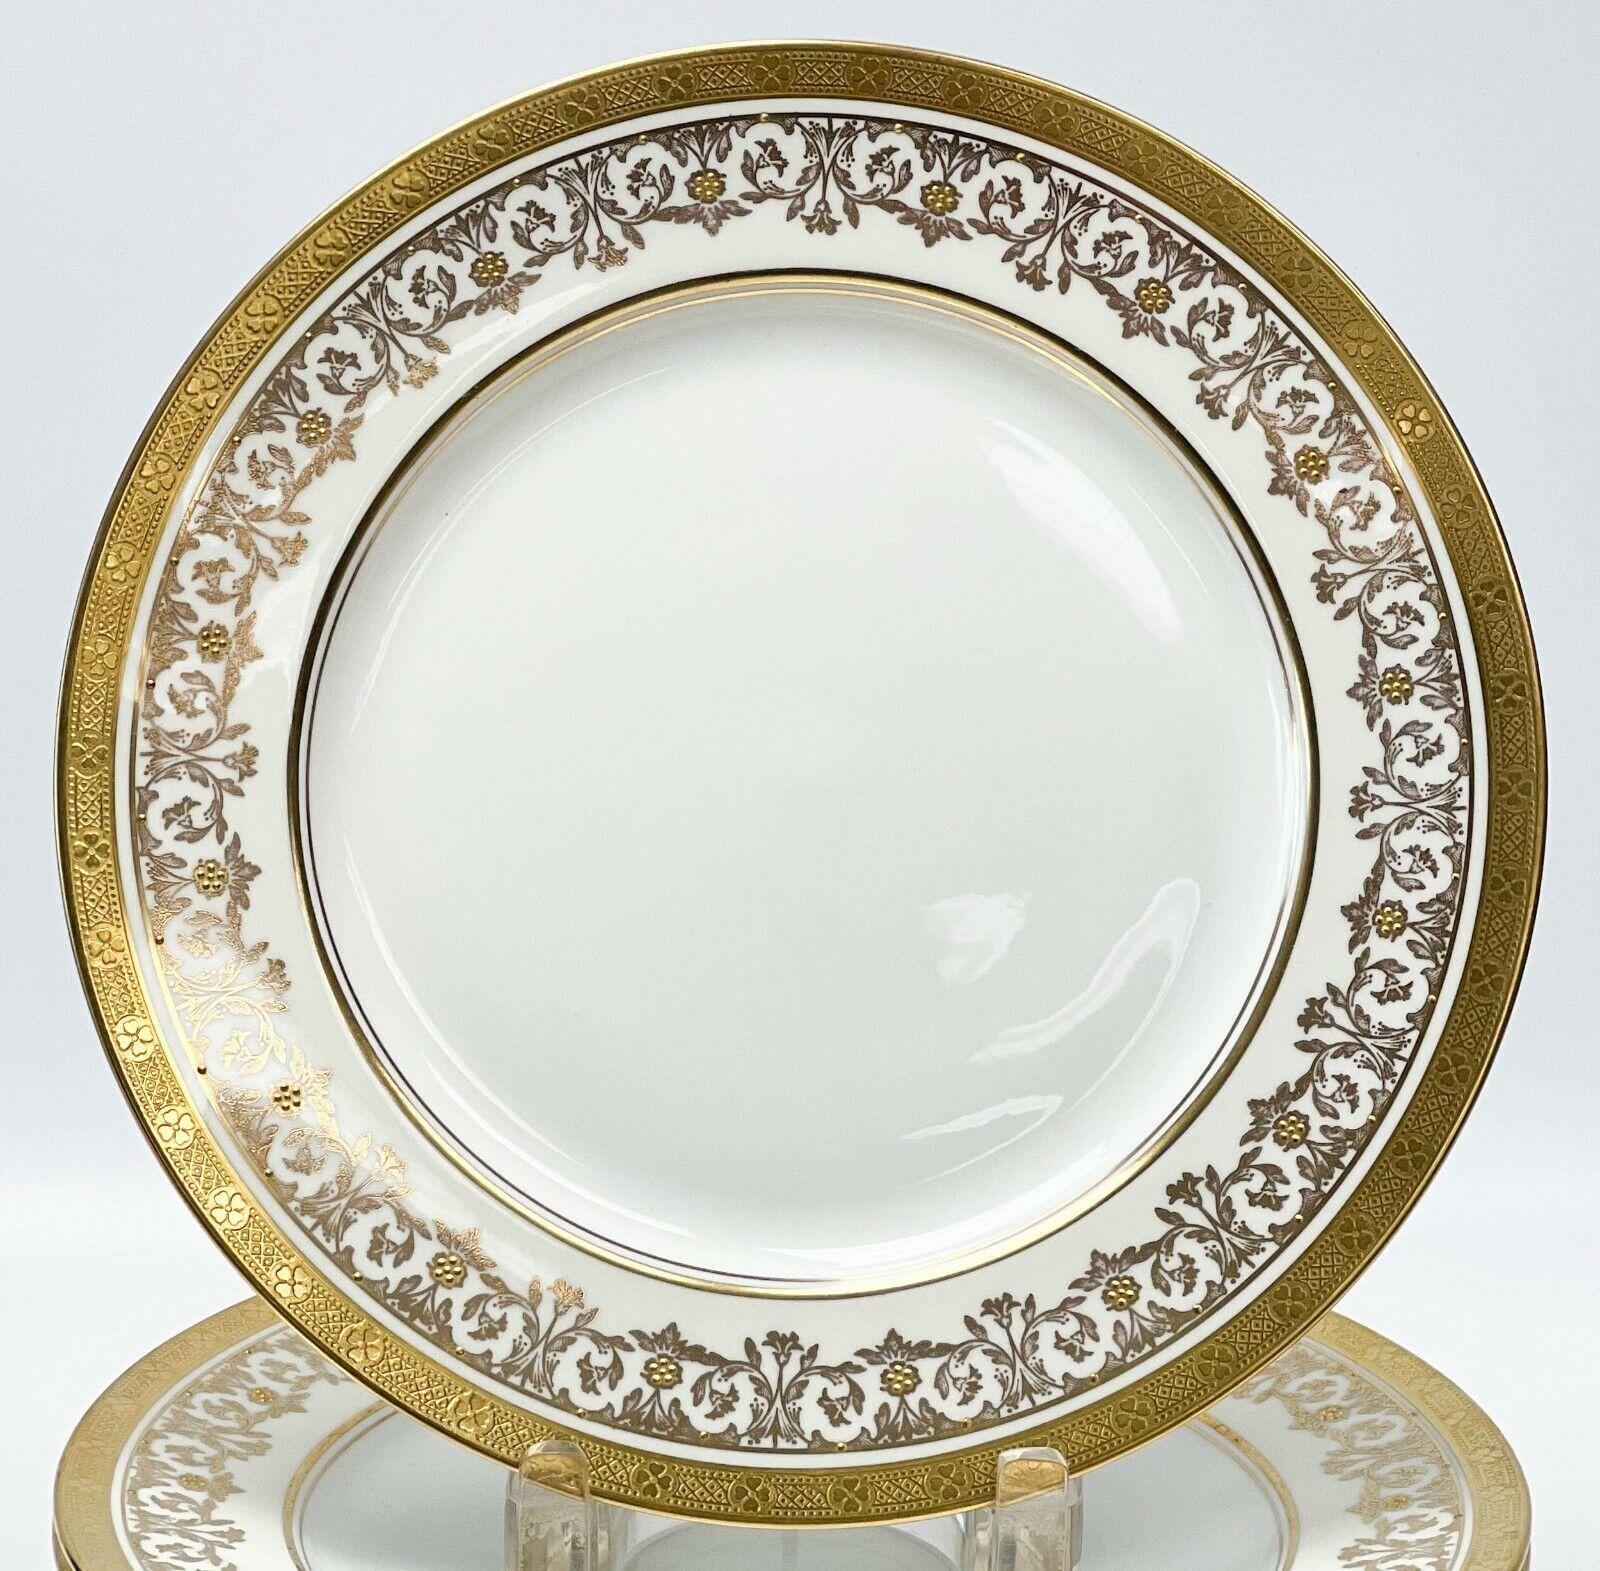 12 Aynsley England Porcelain Dinner Plates in Kenilworth Ivory, circa 1940

A white center with an off-white ground to the edge with ornate gilt foliate decoration with raised gold floral accents. A geometric floral pattern to the gilt rims.